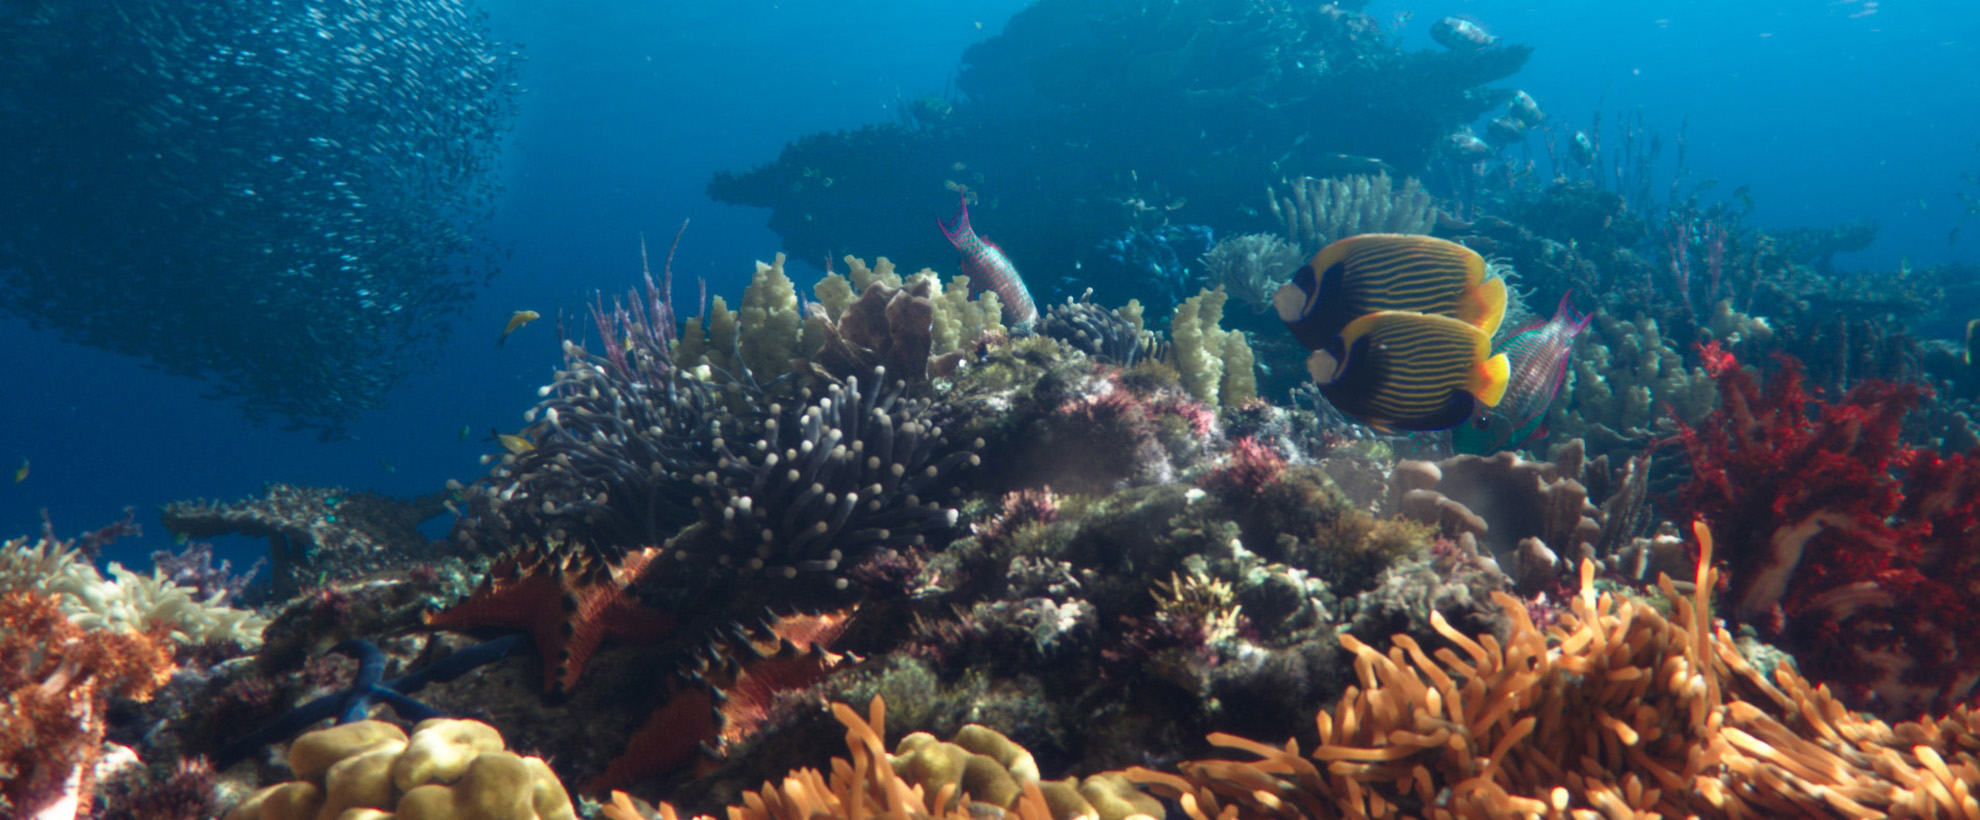 Two yellow and blue fish in a coral reef with a school of smaller fish on the left.